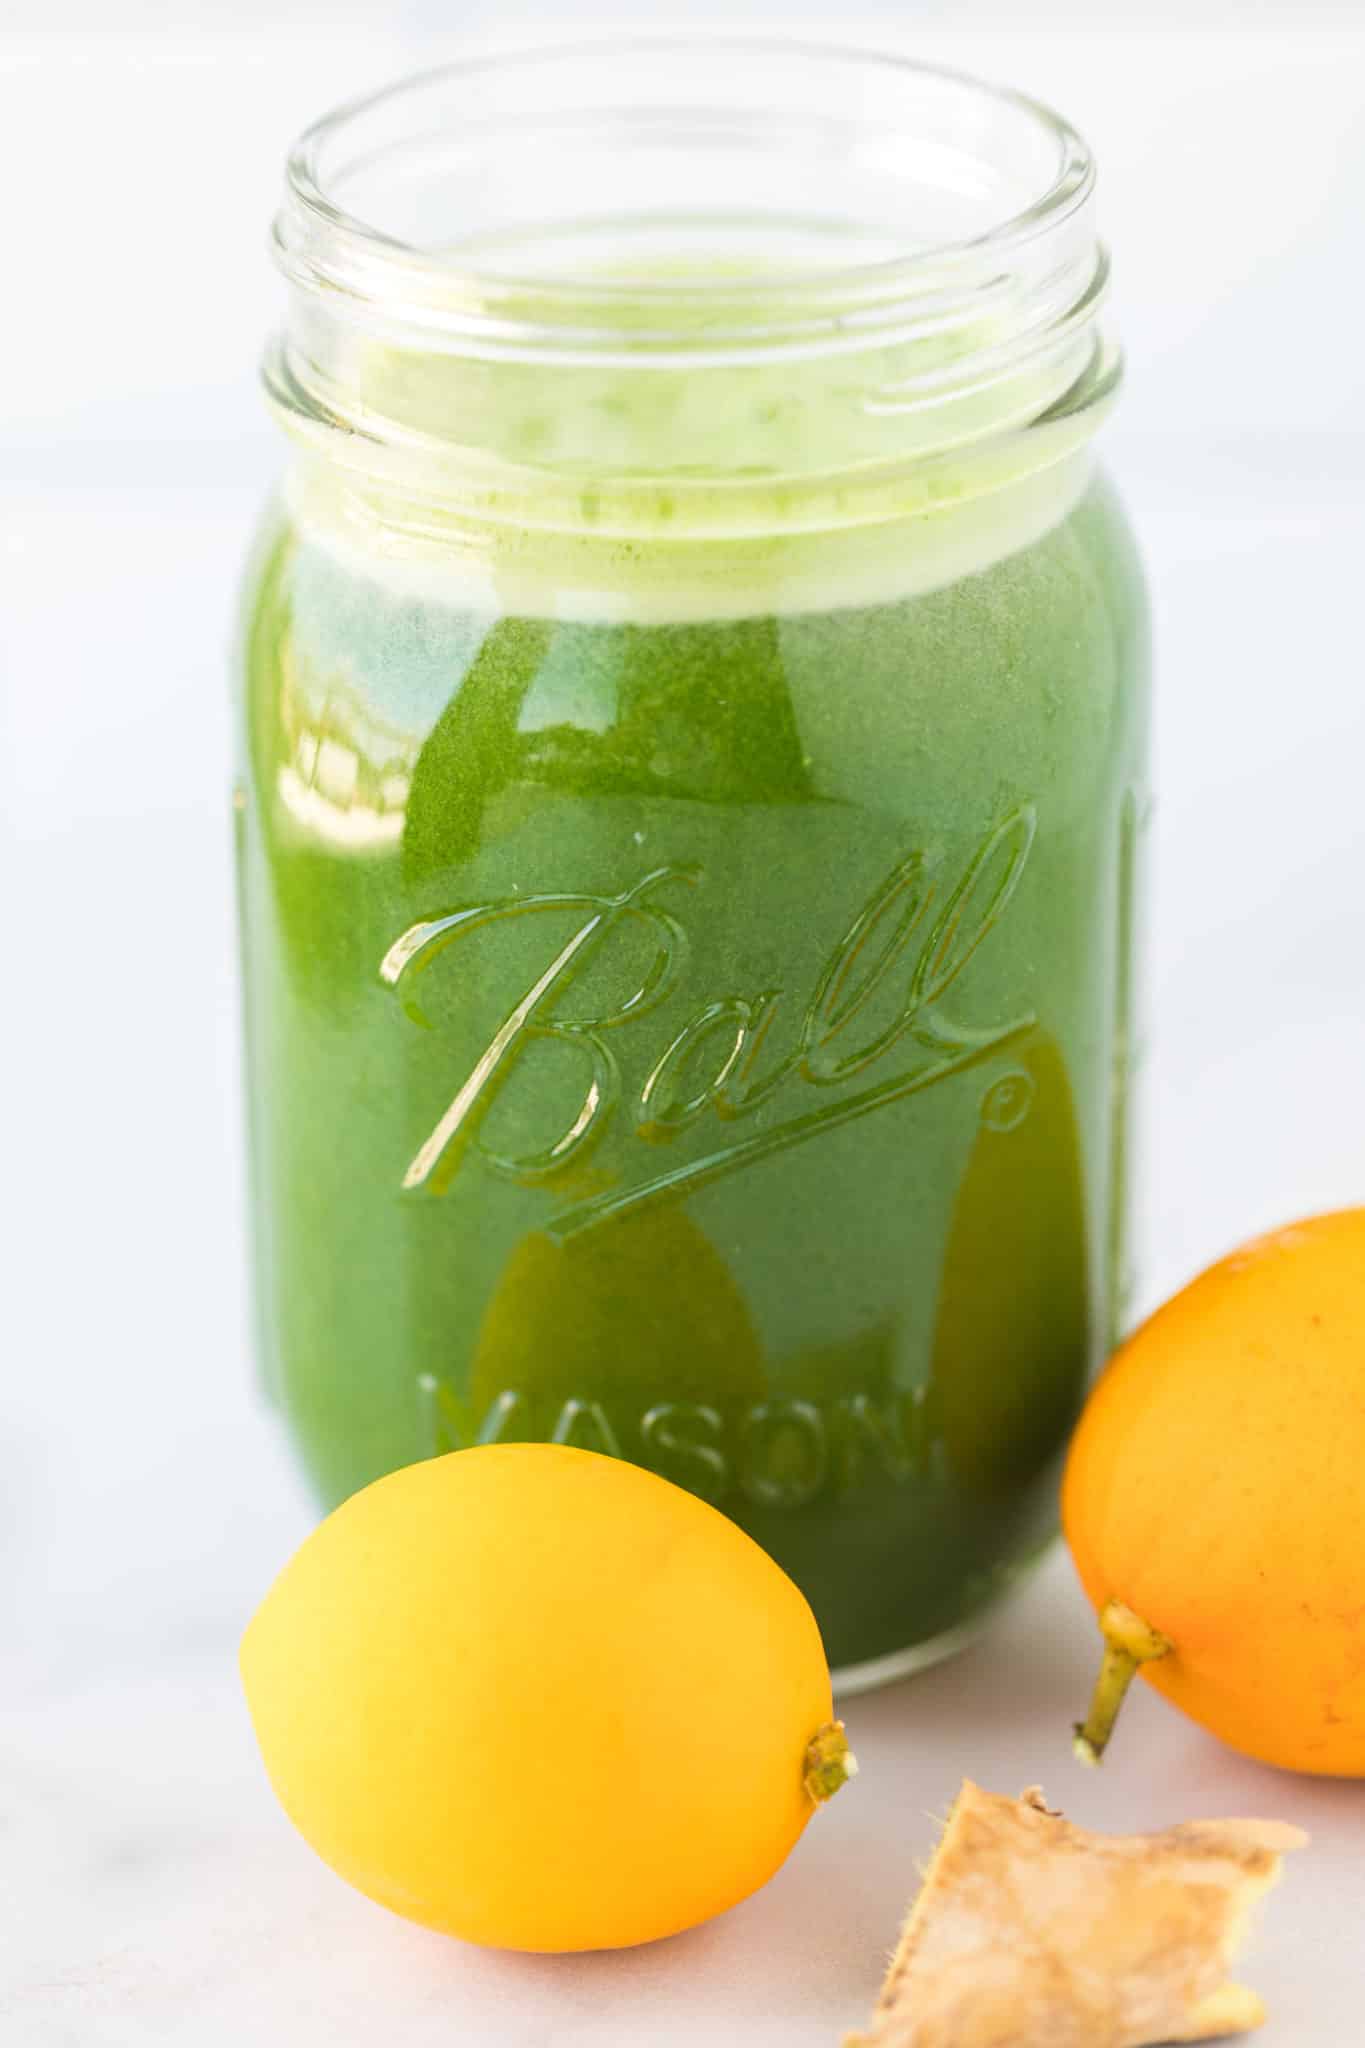 https://www.cleaneatingkitchen.com/wp-content/uploads/2021/06/parsley-juice-3-copy-scaled.jpg